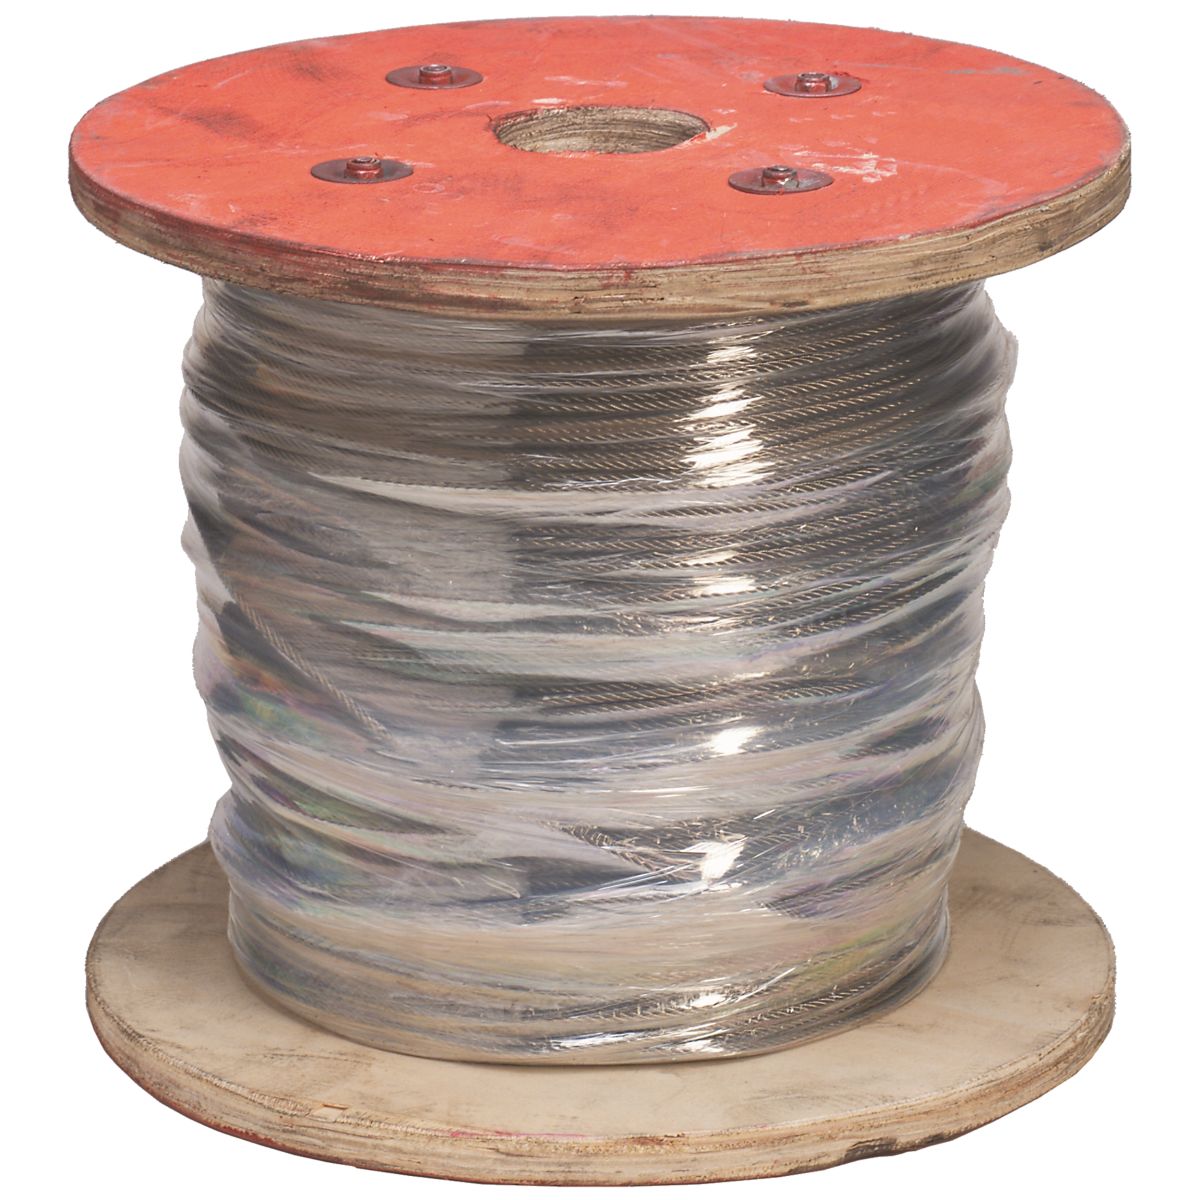 1/8" Type 304 Stainless Steel Wire Rope